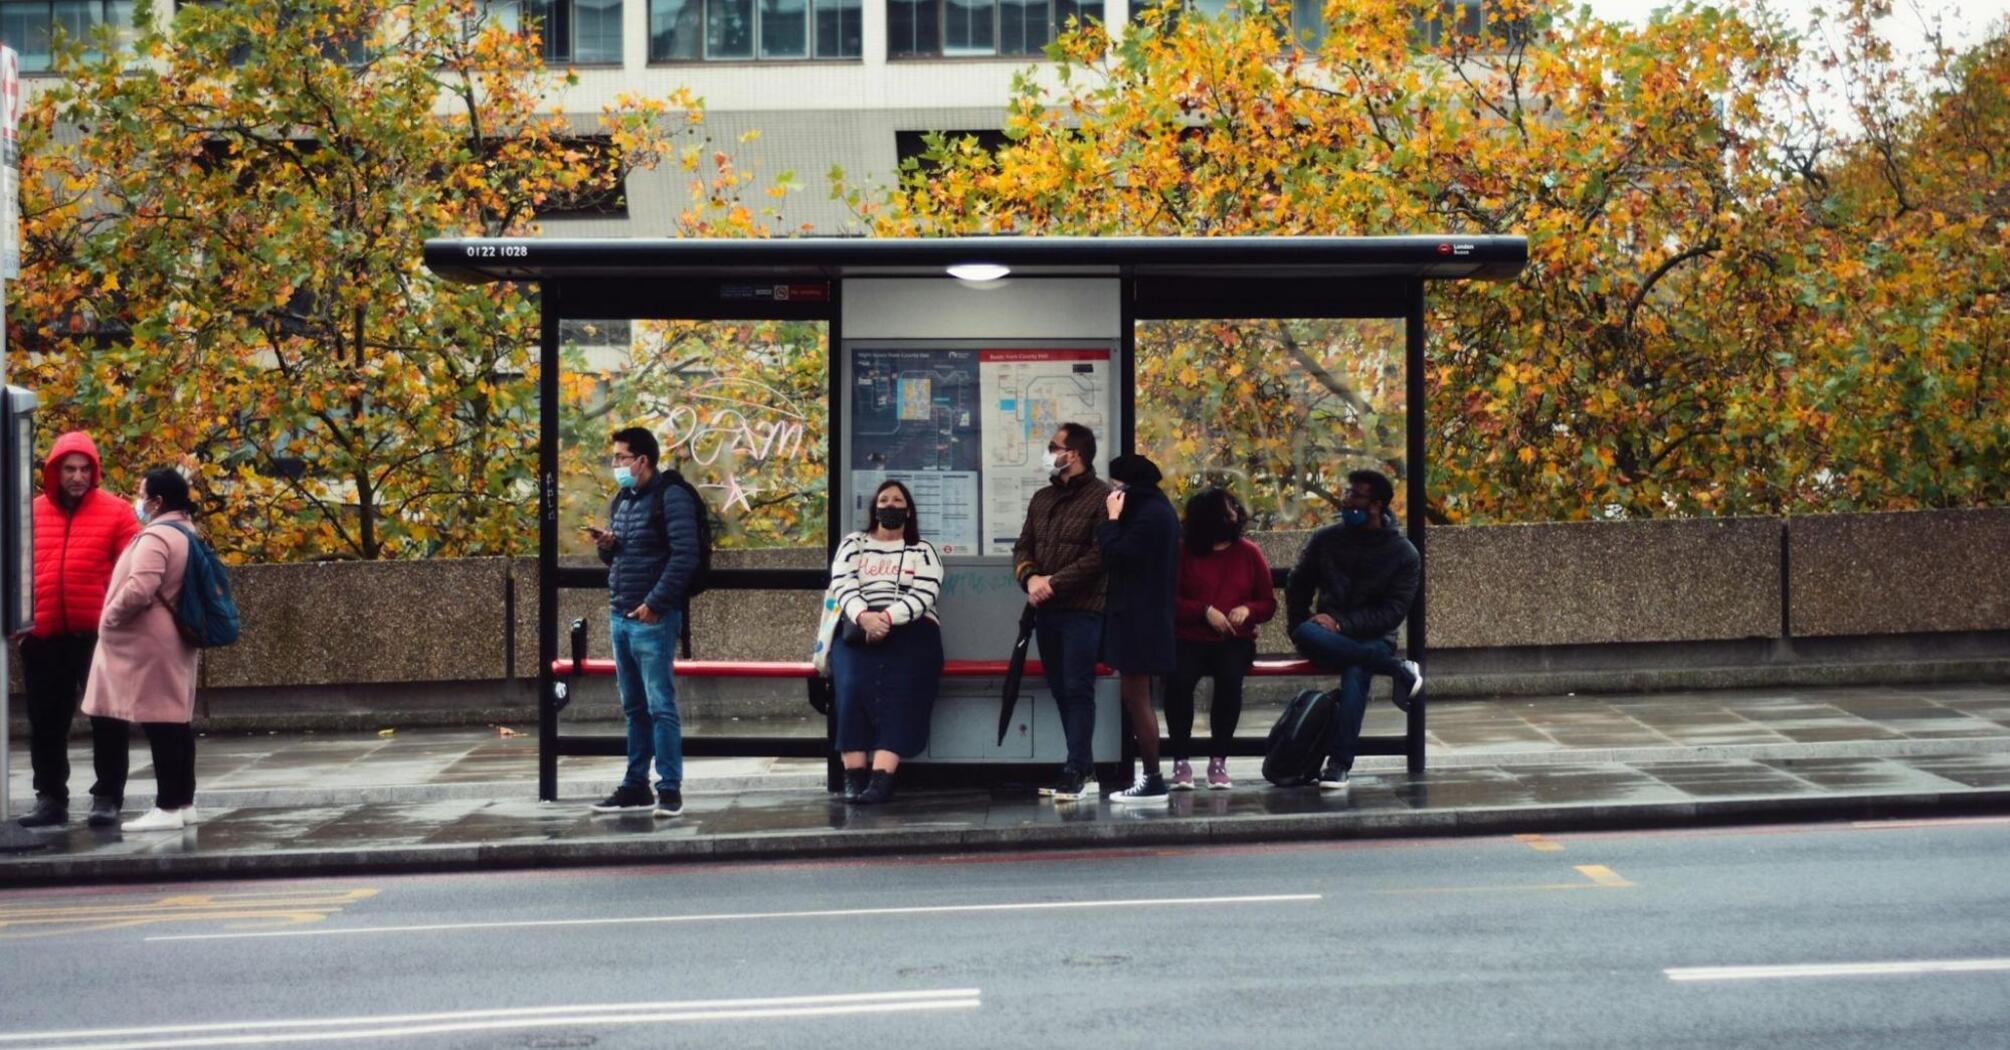 People waiting at a bus stop in an urban area